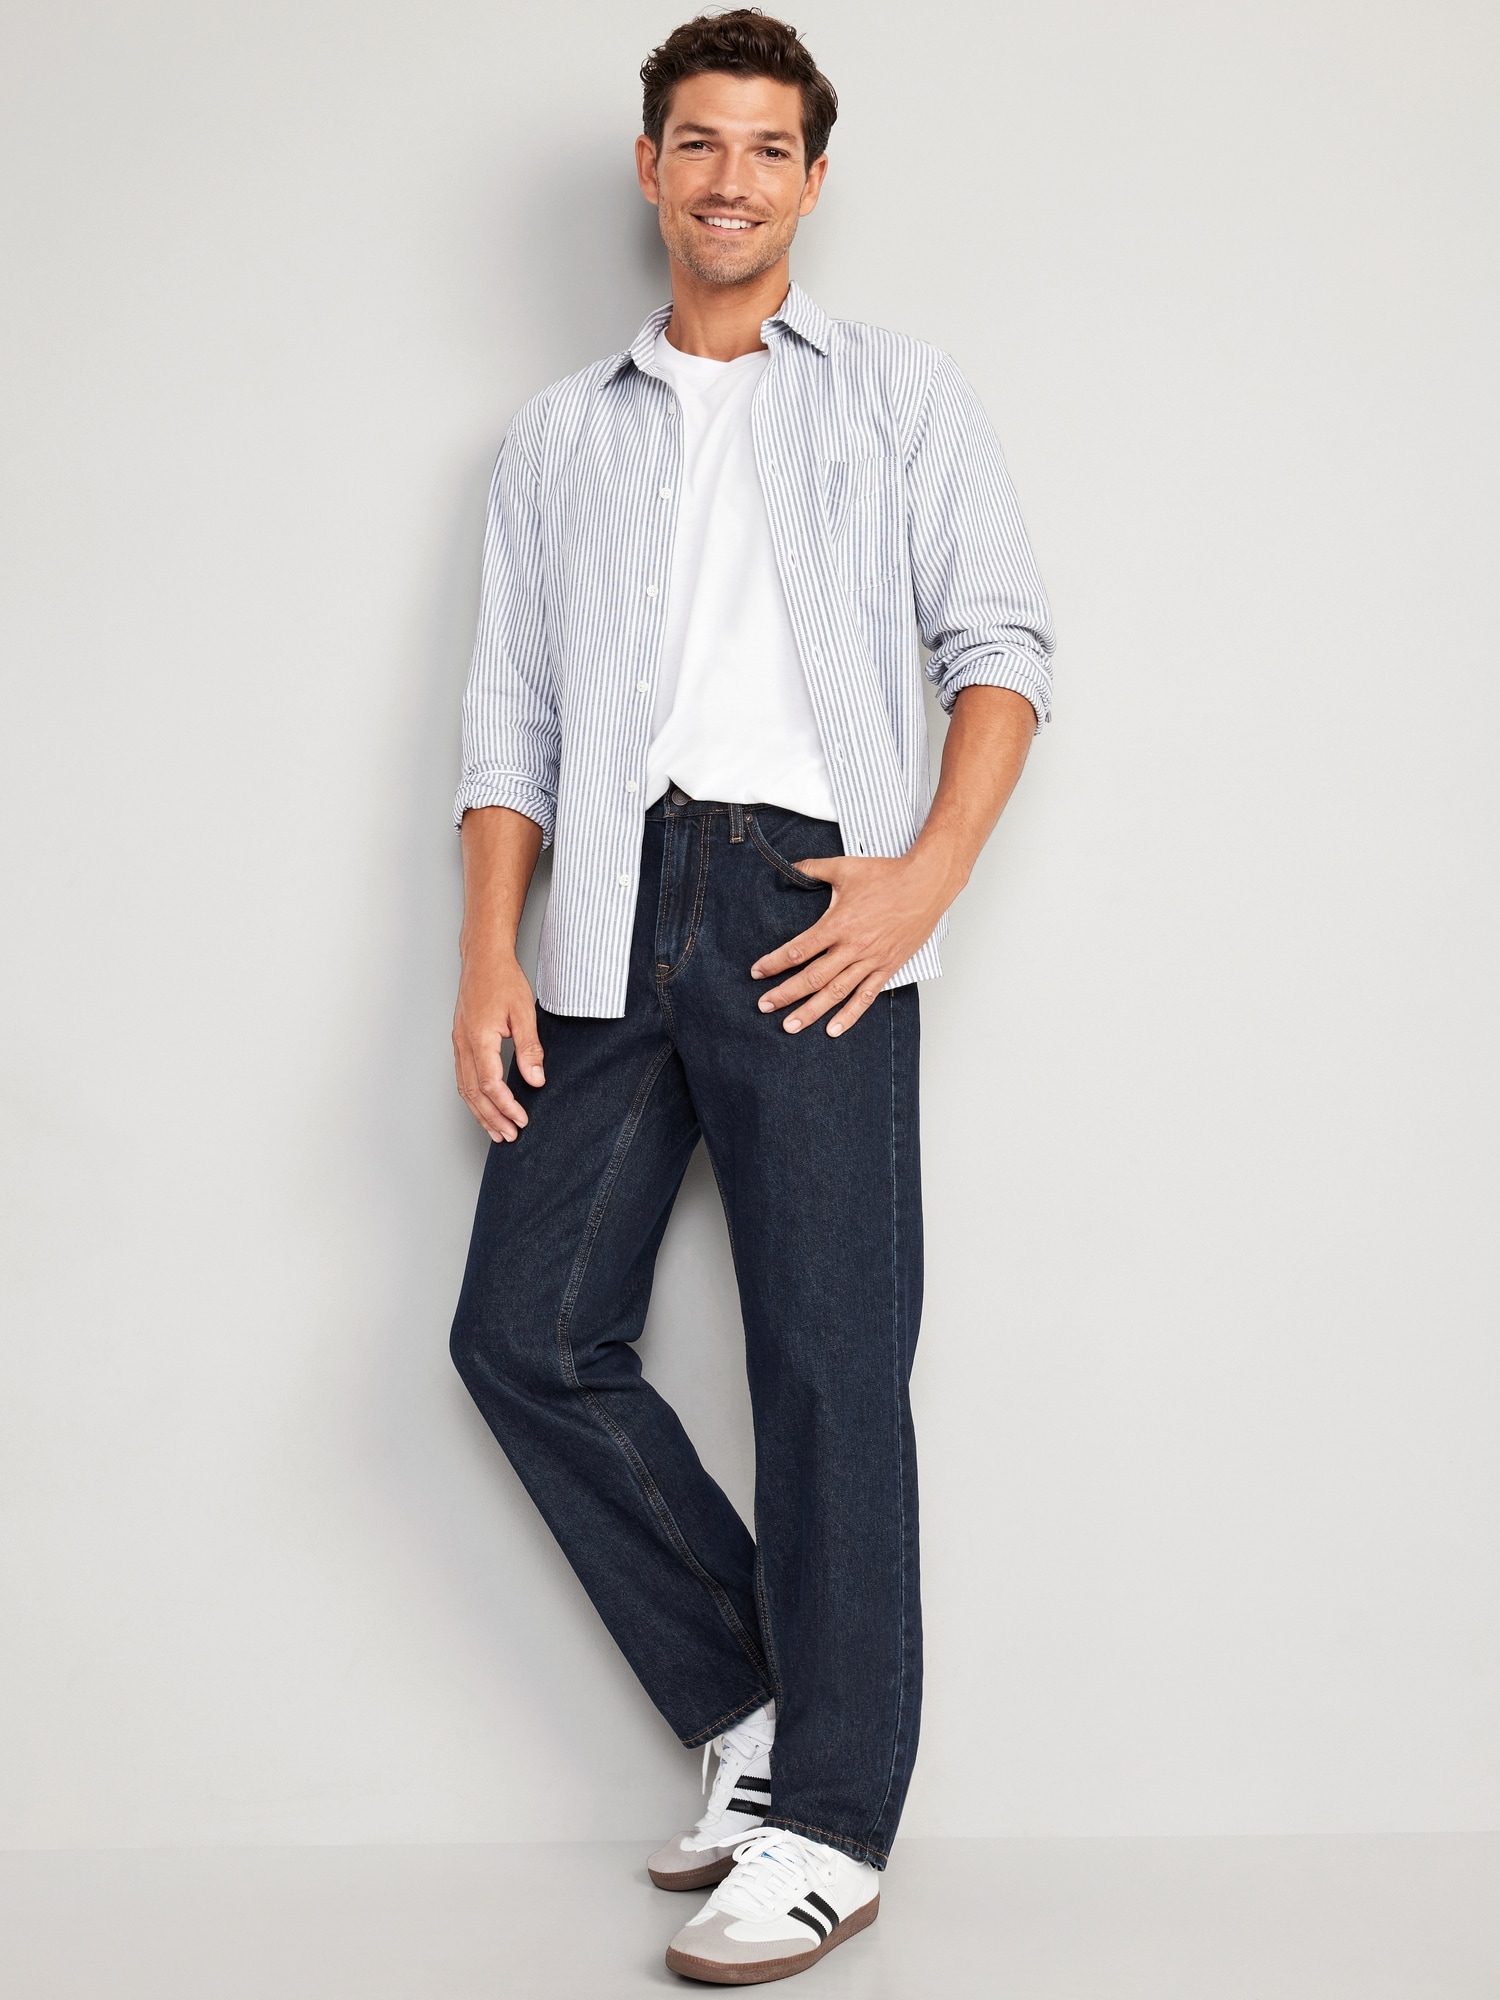 Wow Loose Non-Stretch Jeans for Men | Old Navy